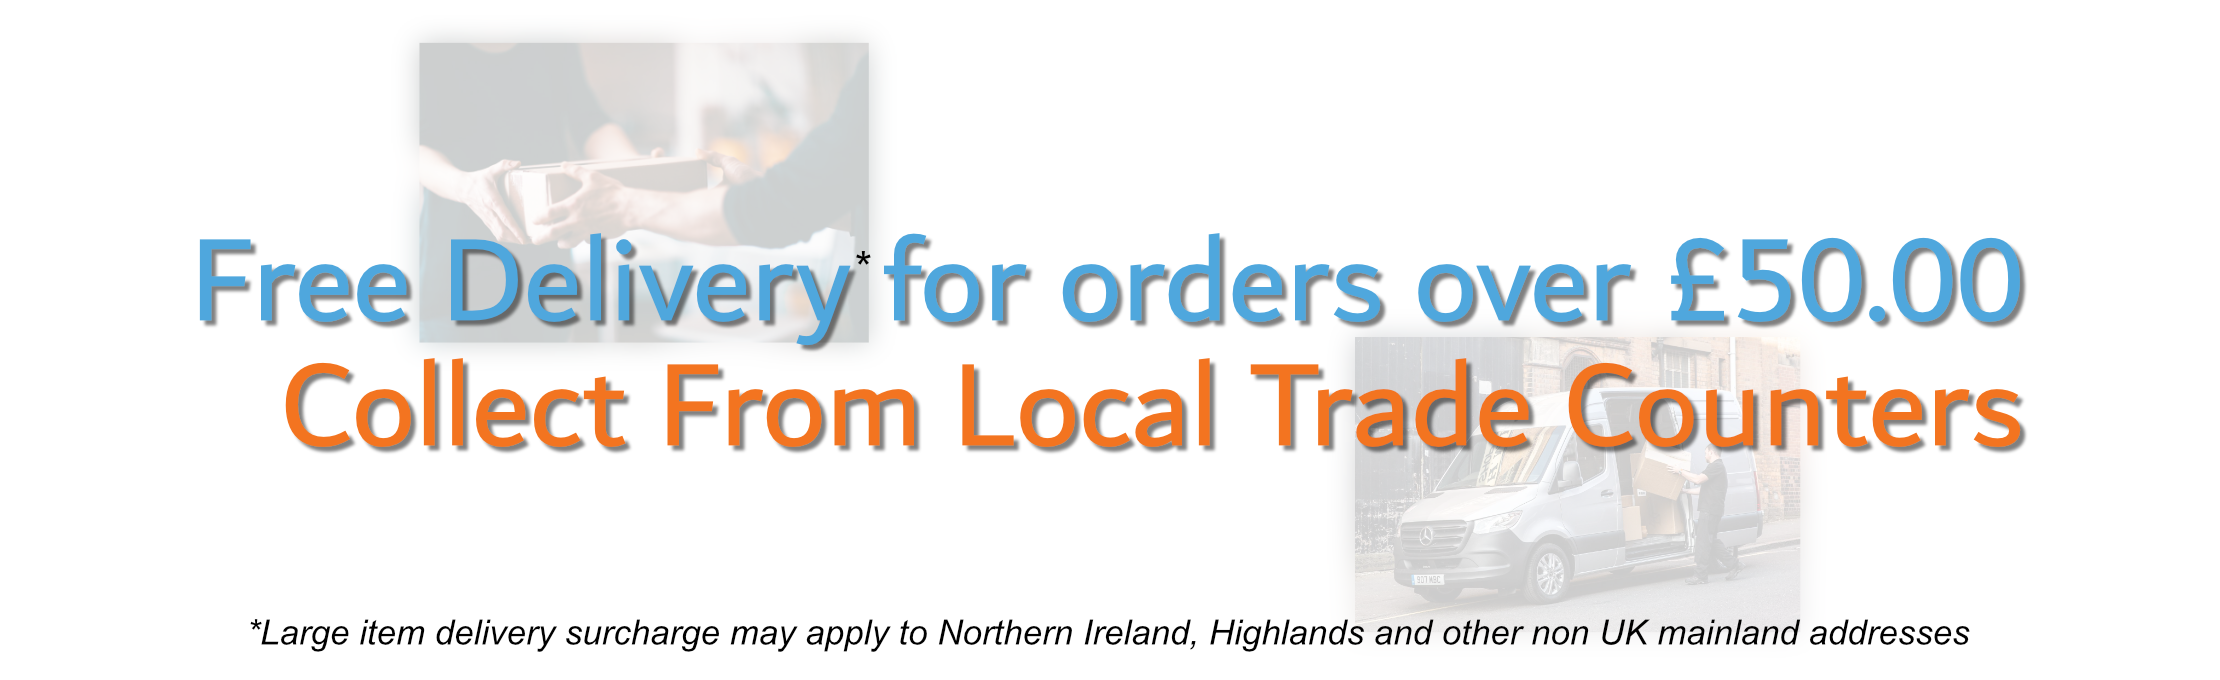 *Delivery surcharge may apply to Northern Ireland, Upper Highlands and non UK Mainland addresses*